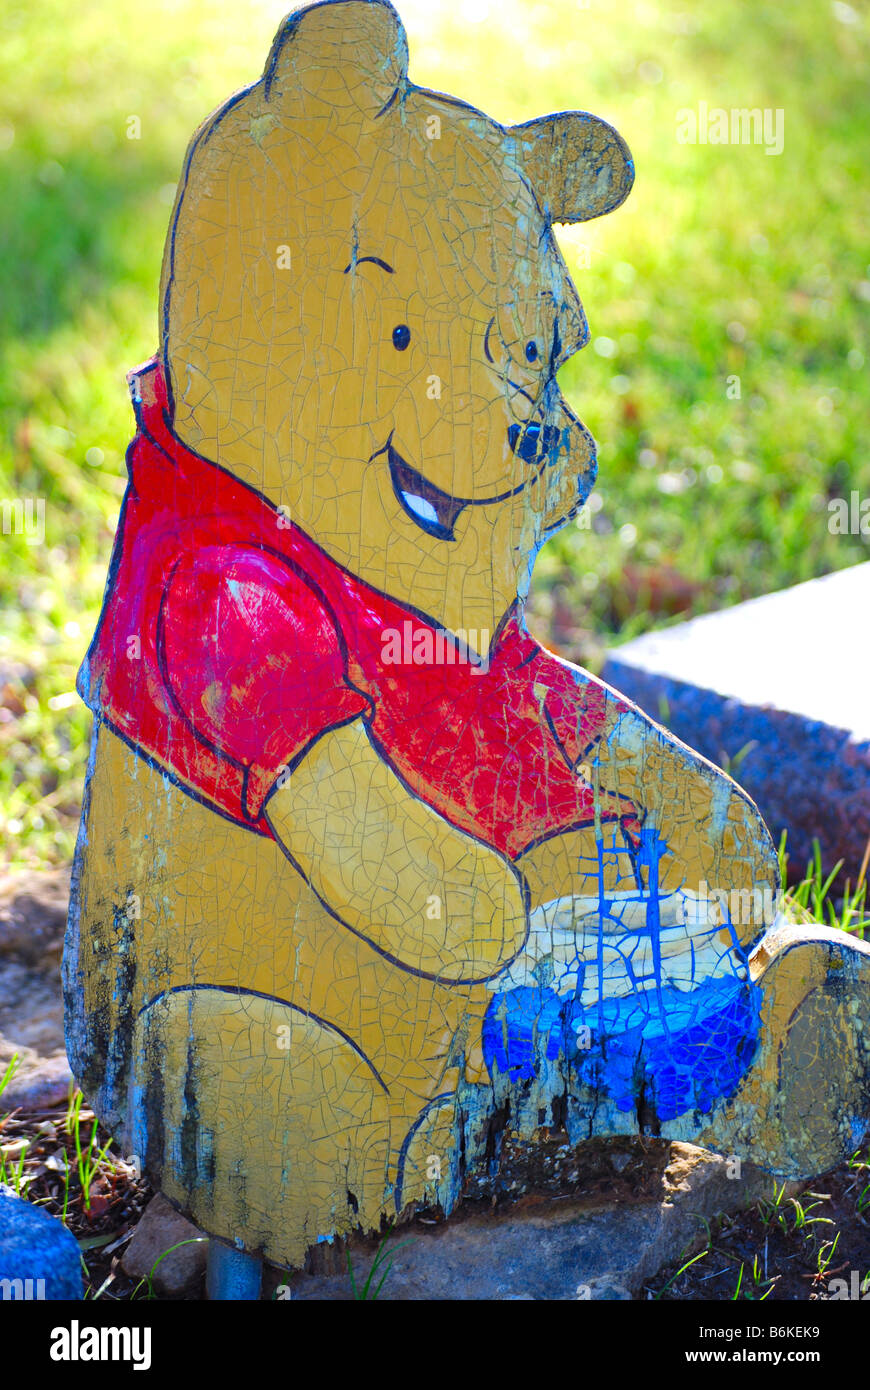 Wooden figure of Winnie-the-Pooh Stock Photo